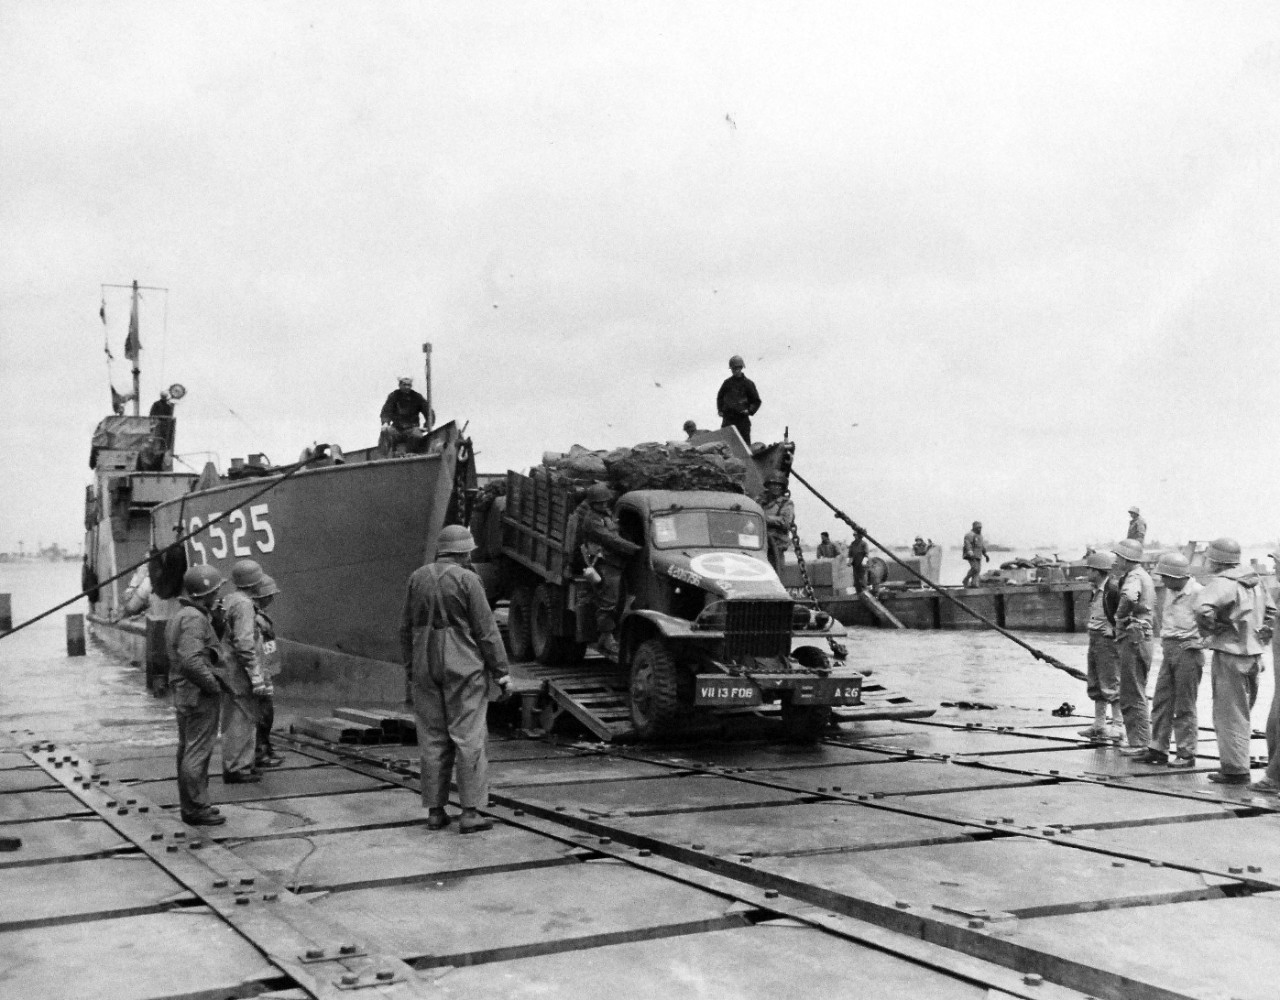 80-G-285137:  Normandy Invasion, Mulberries, June 1944.   The pontoon causeway at “Omaha” beach, forming part of the U.S. Mulberry the man-made harbor off coast of France, built to protect landing craft from storms in English Channel.  Note LCT 525. Photograph released November 7, 1944.  Official U.S. Navy photograph, now in the collections of the National Archives.  (2016/03/15).